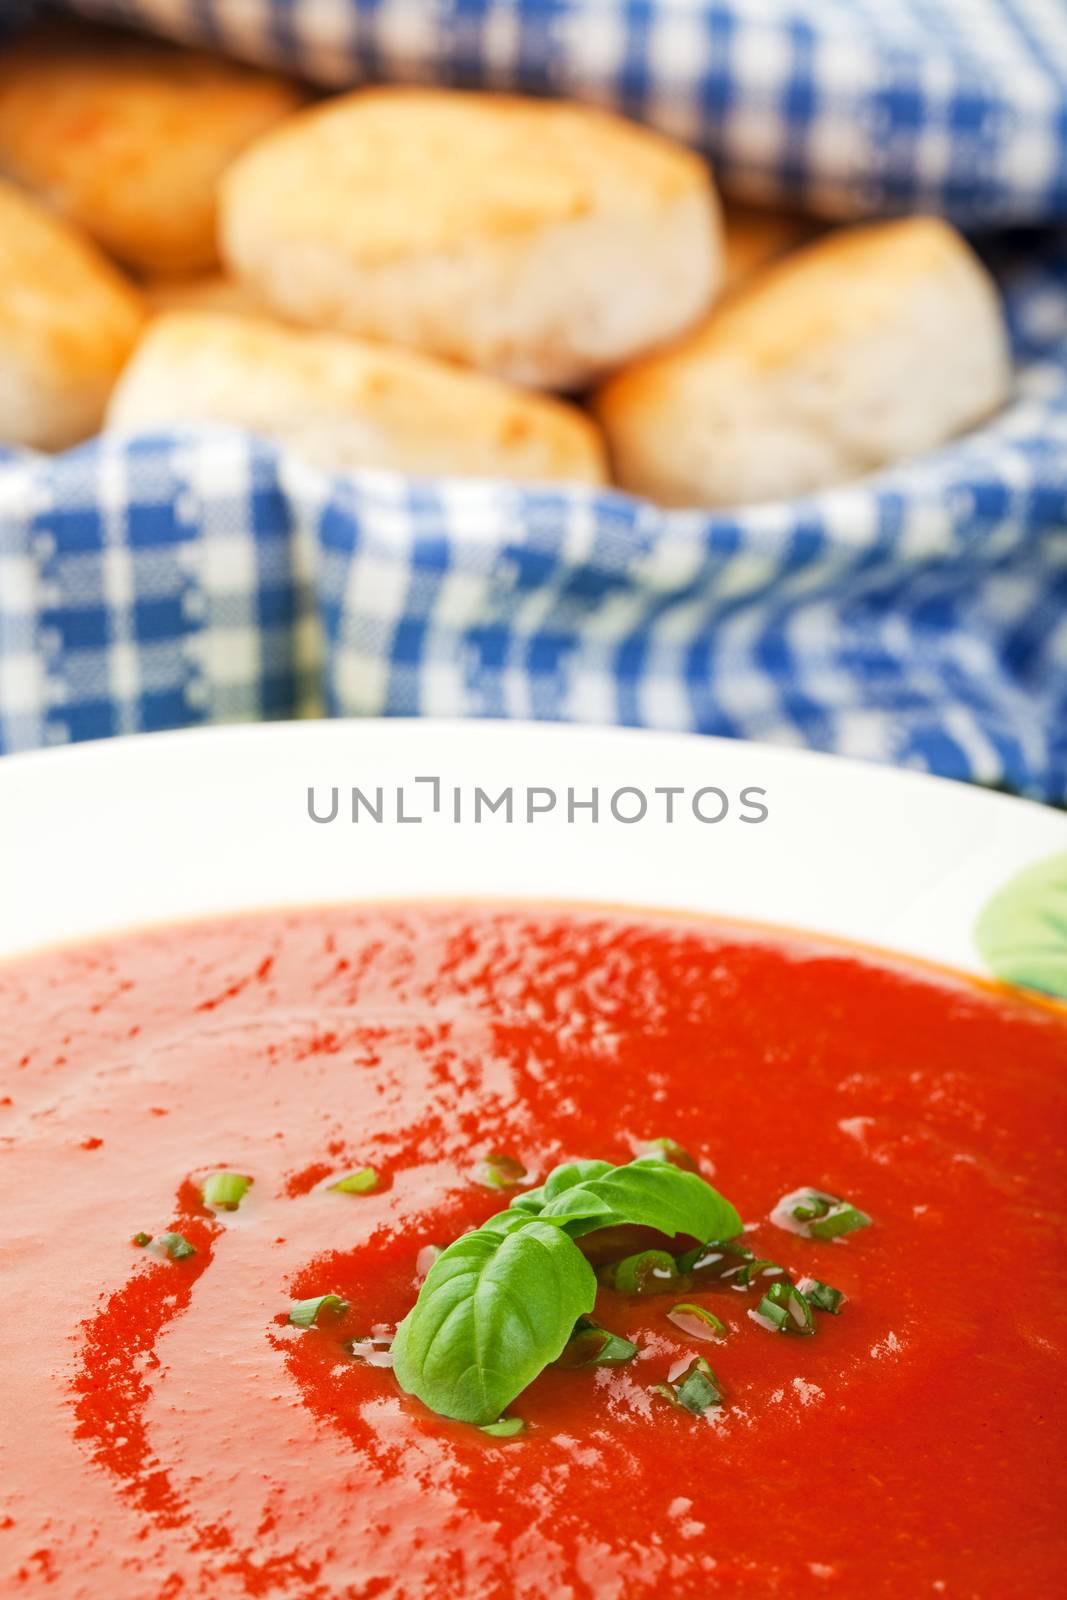 Tomato Soup with Homemade Biscuits by songbird839